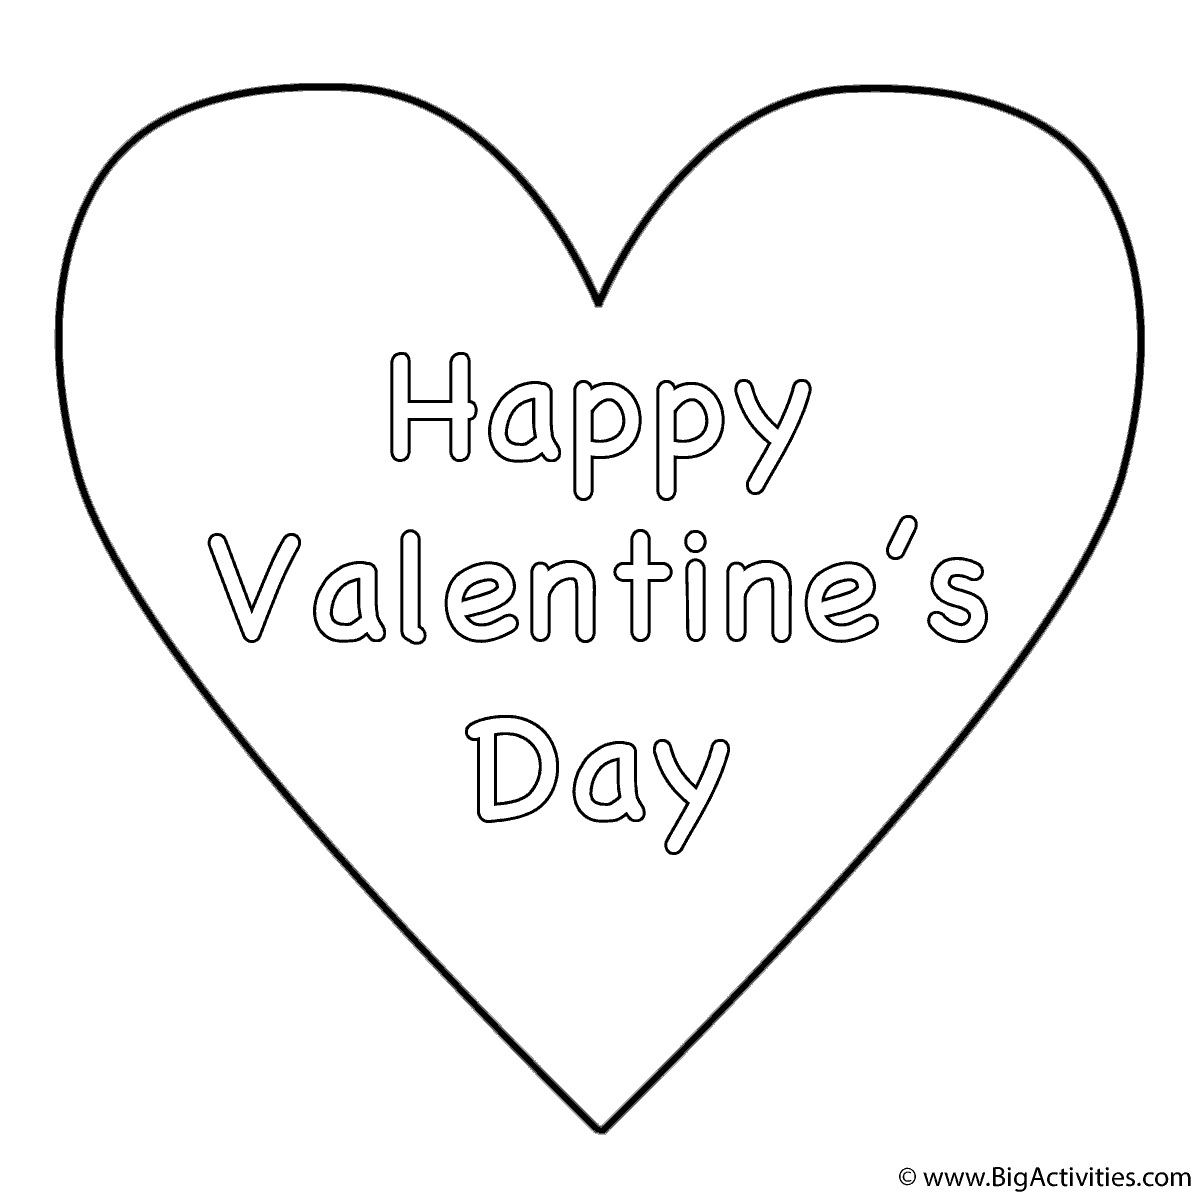 Simple Heart (Happy Valentine's Day) - Coloring Page ...